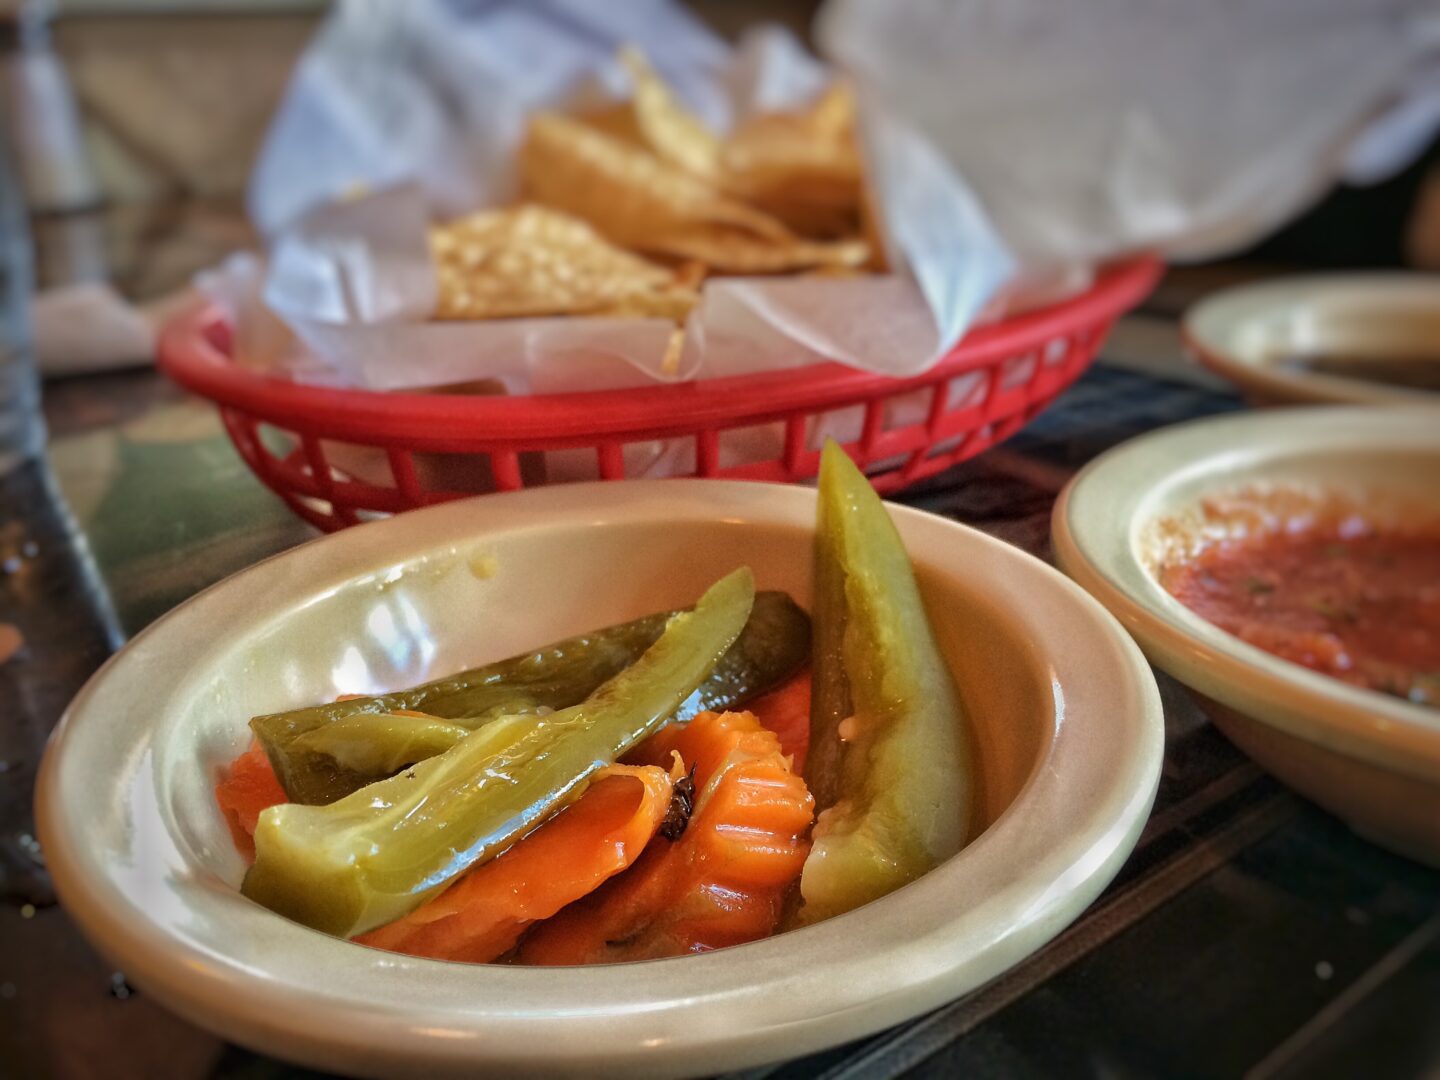 A bowl of pickles on a table.